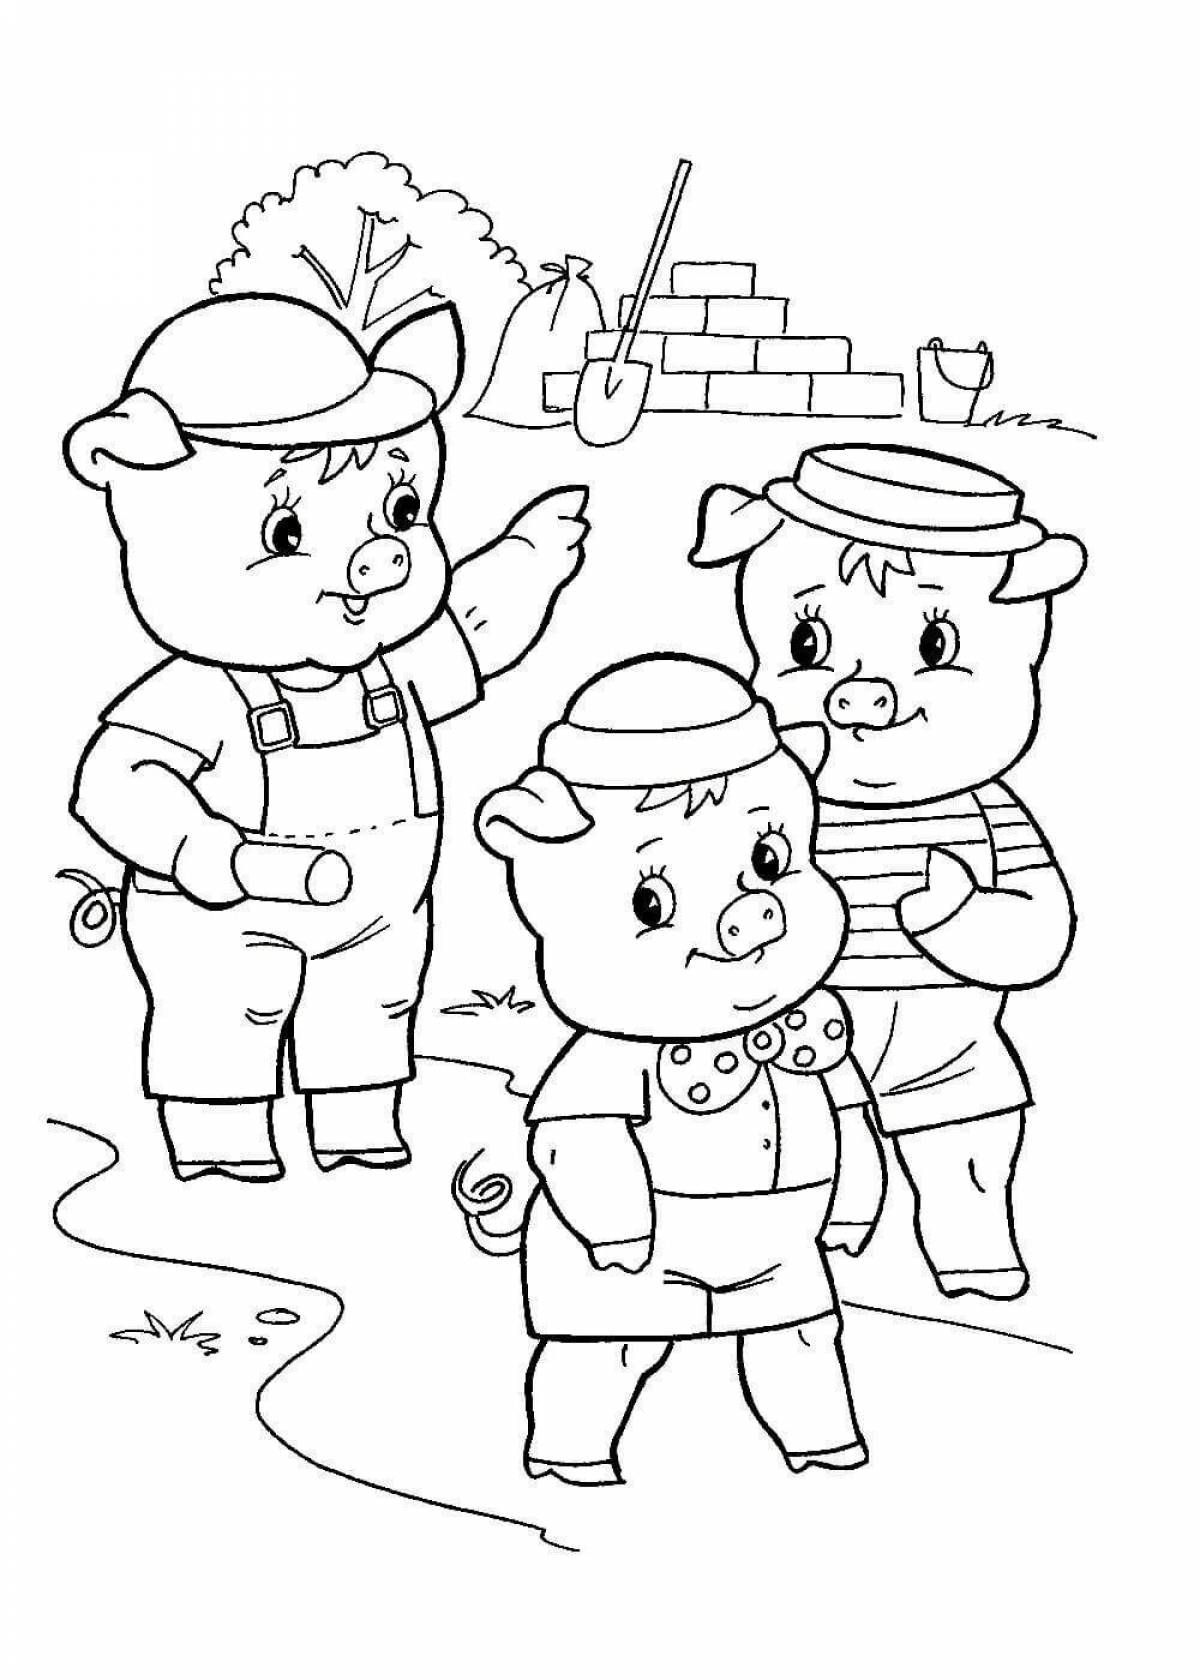 3 little pigs coloring book for preschoolers